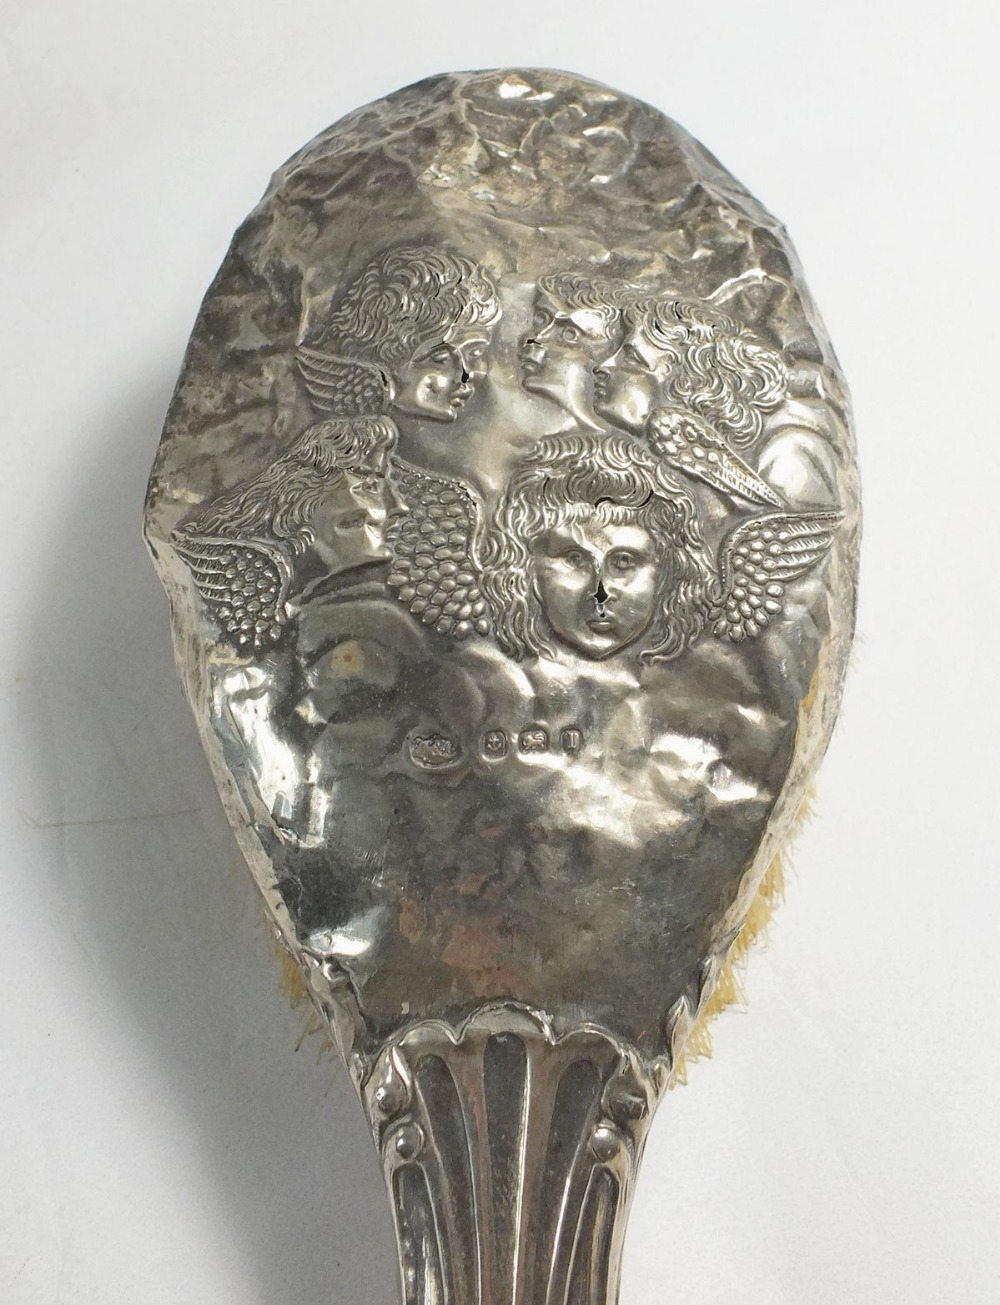 A silver hair brush with embossed angel head decoration and three toiletry/scent bottles with silver - Image 2 of 2